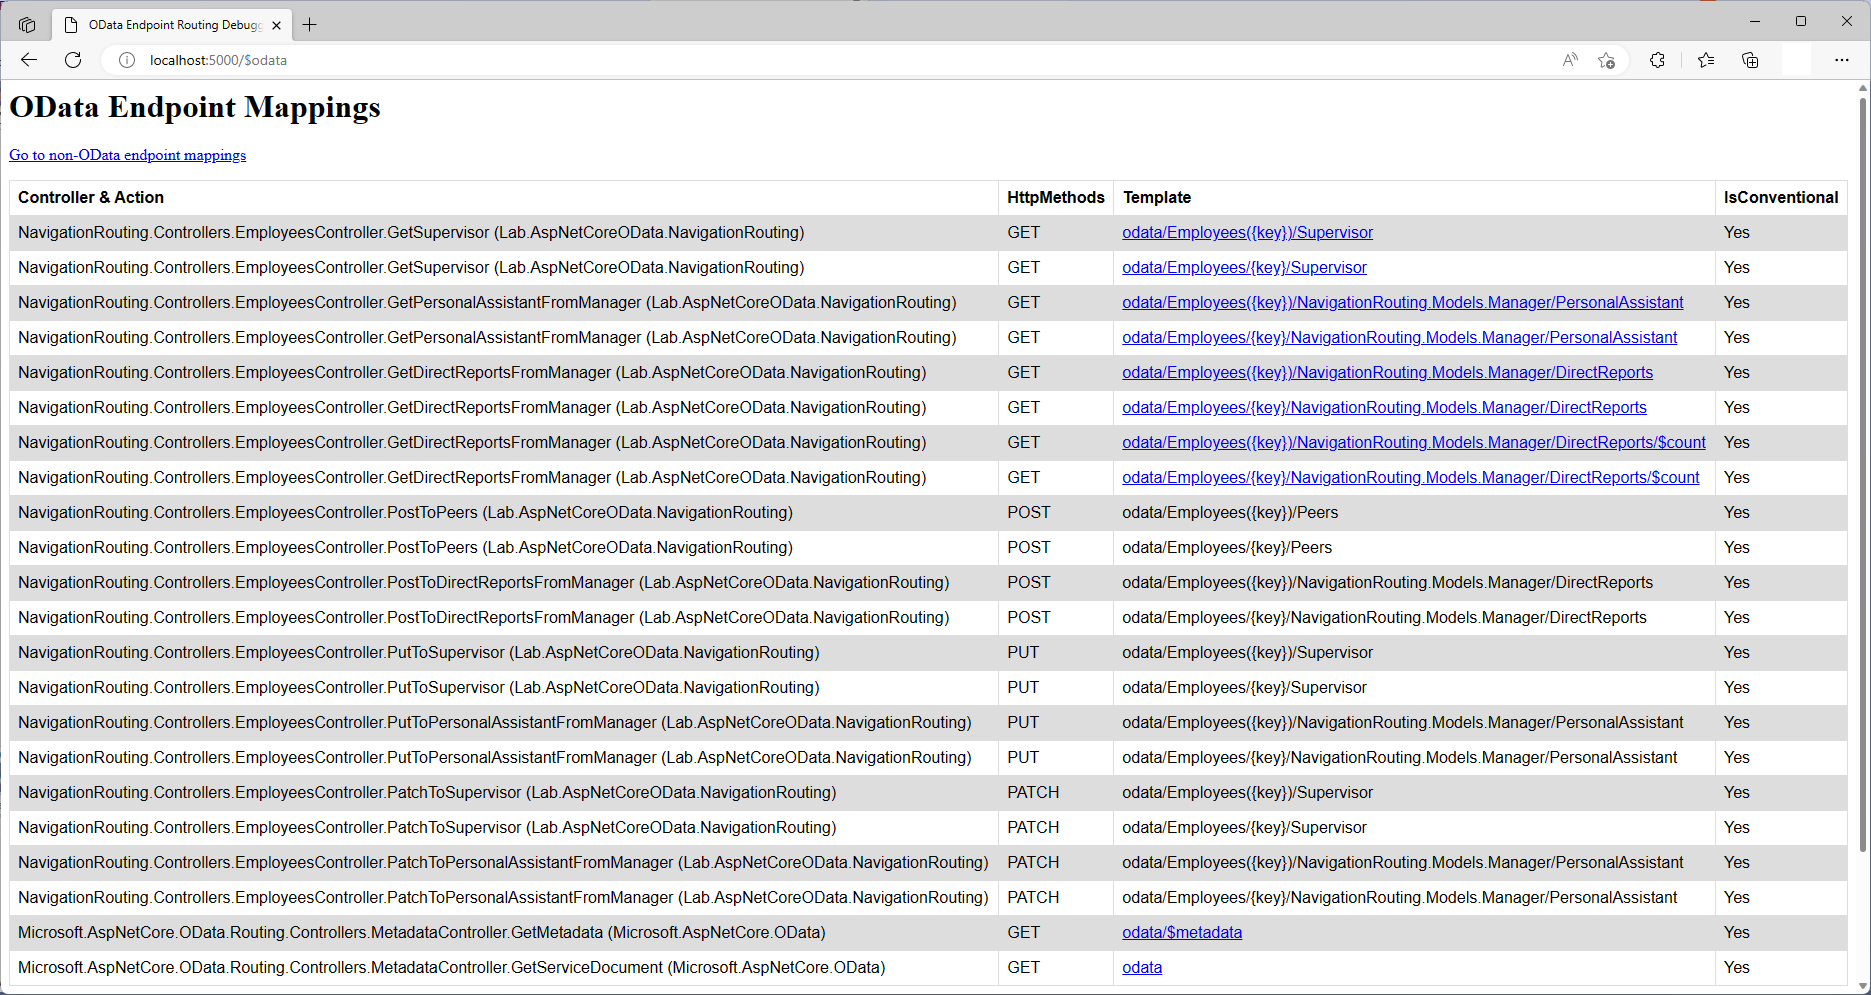 Screenshot of OData navigation routing endpoint mappings